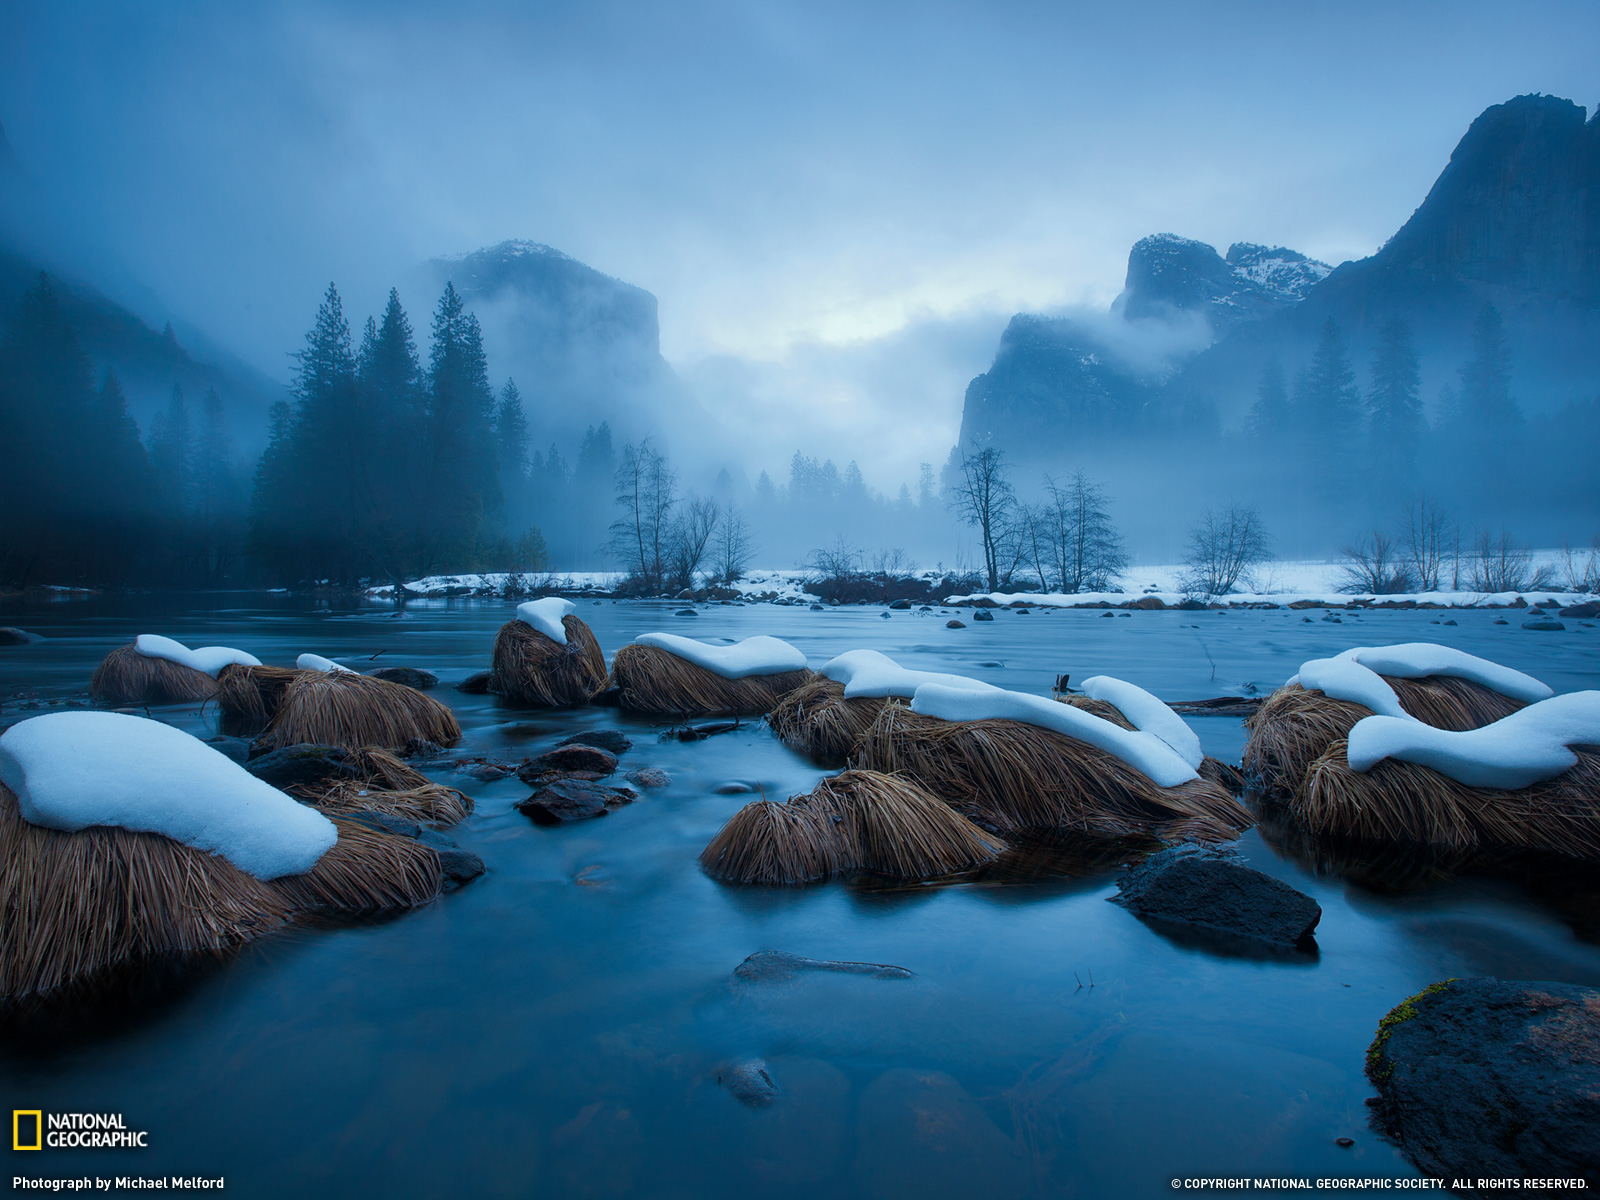 Picture Yosemite Wallpaper National Geographic Photo Of The Day